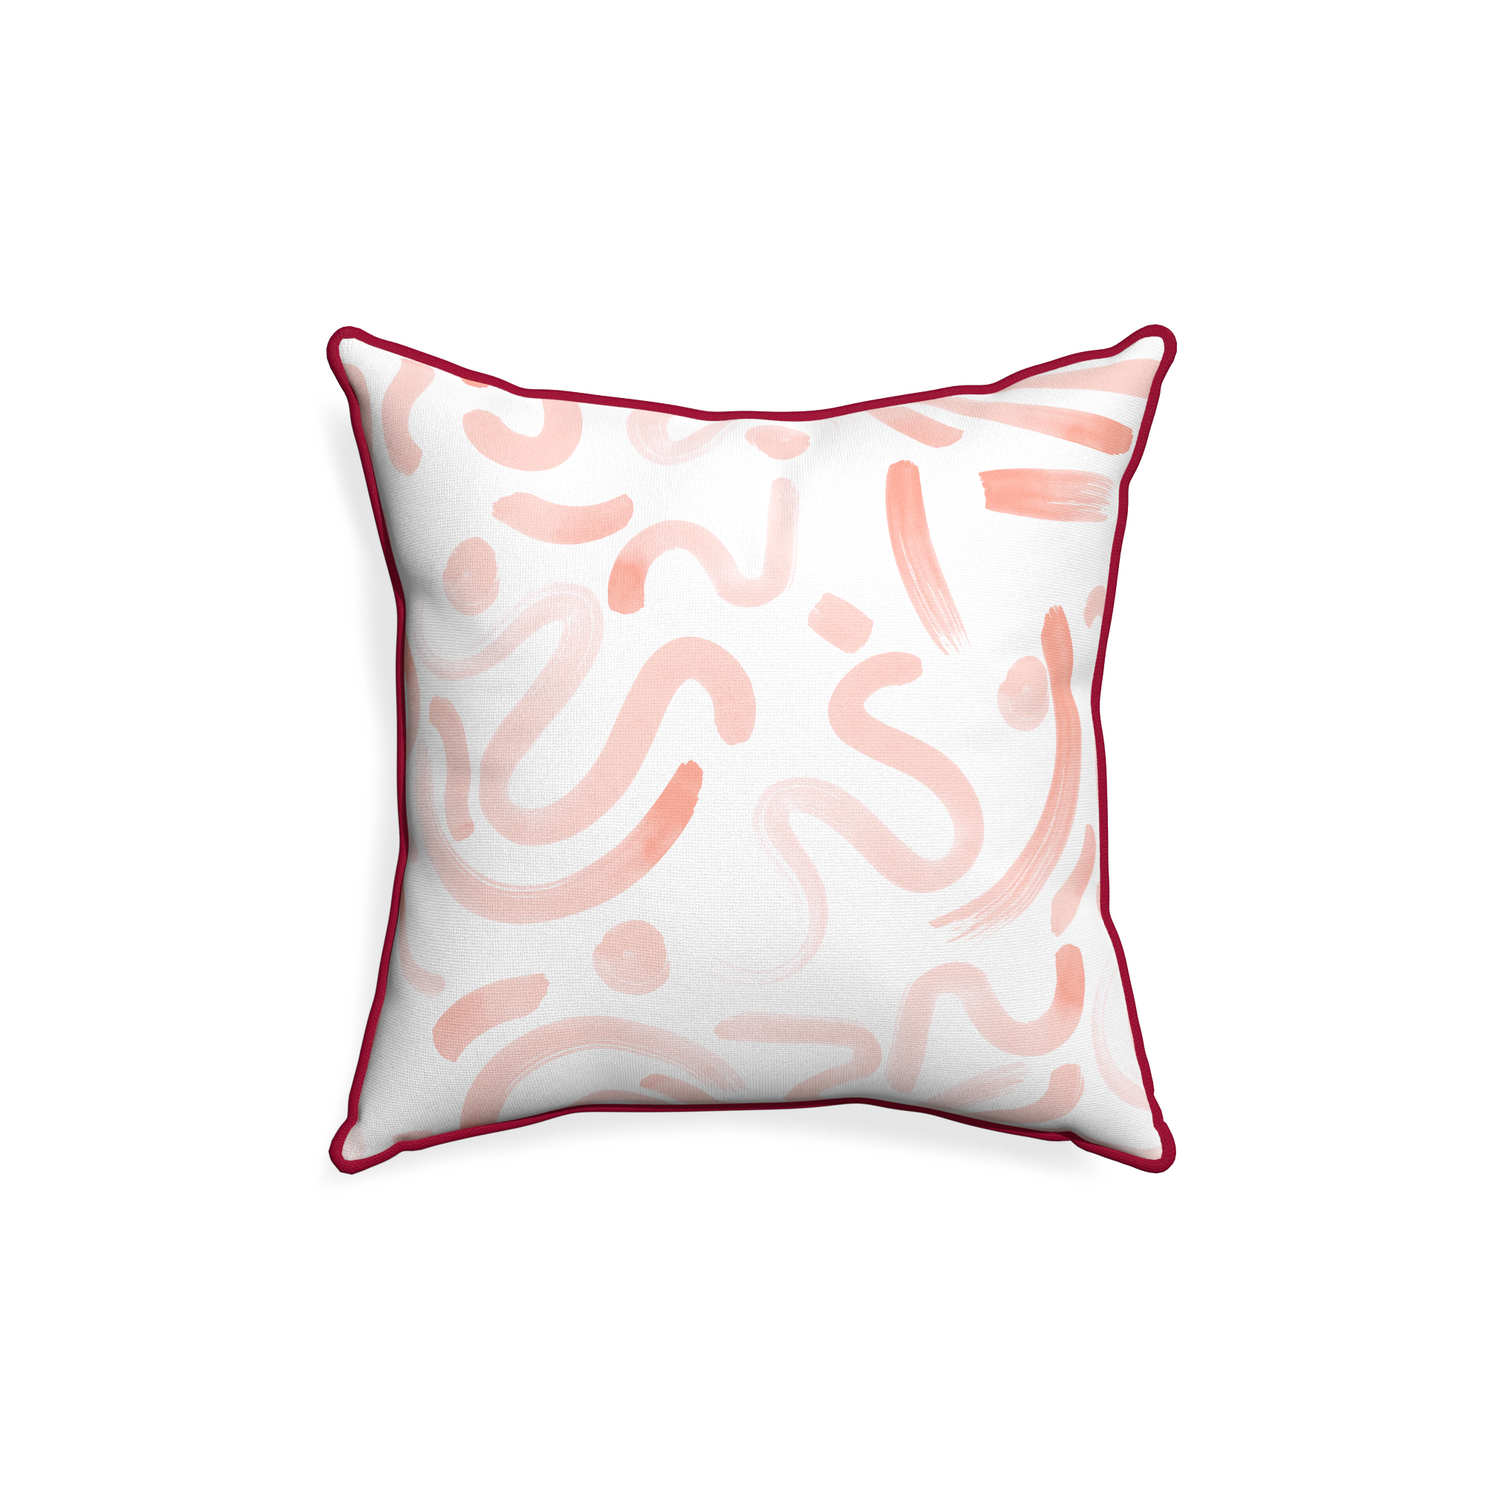 18-square hockney pink custom pillow with raspberry piping on white background